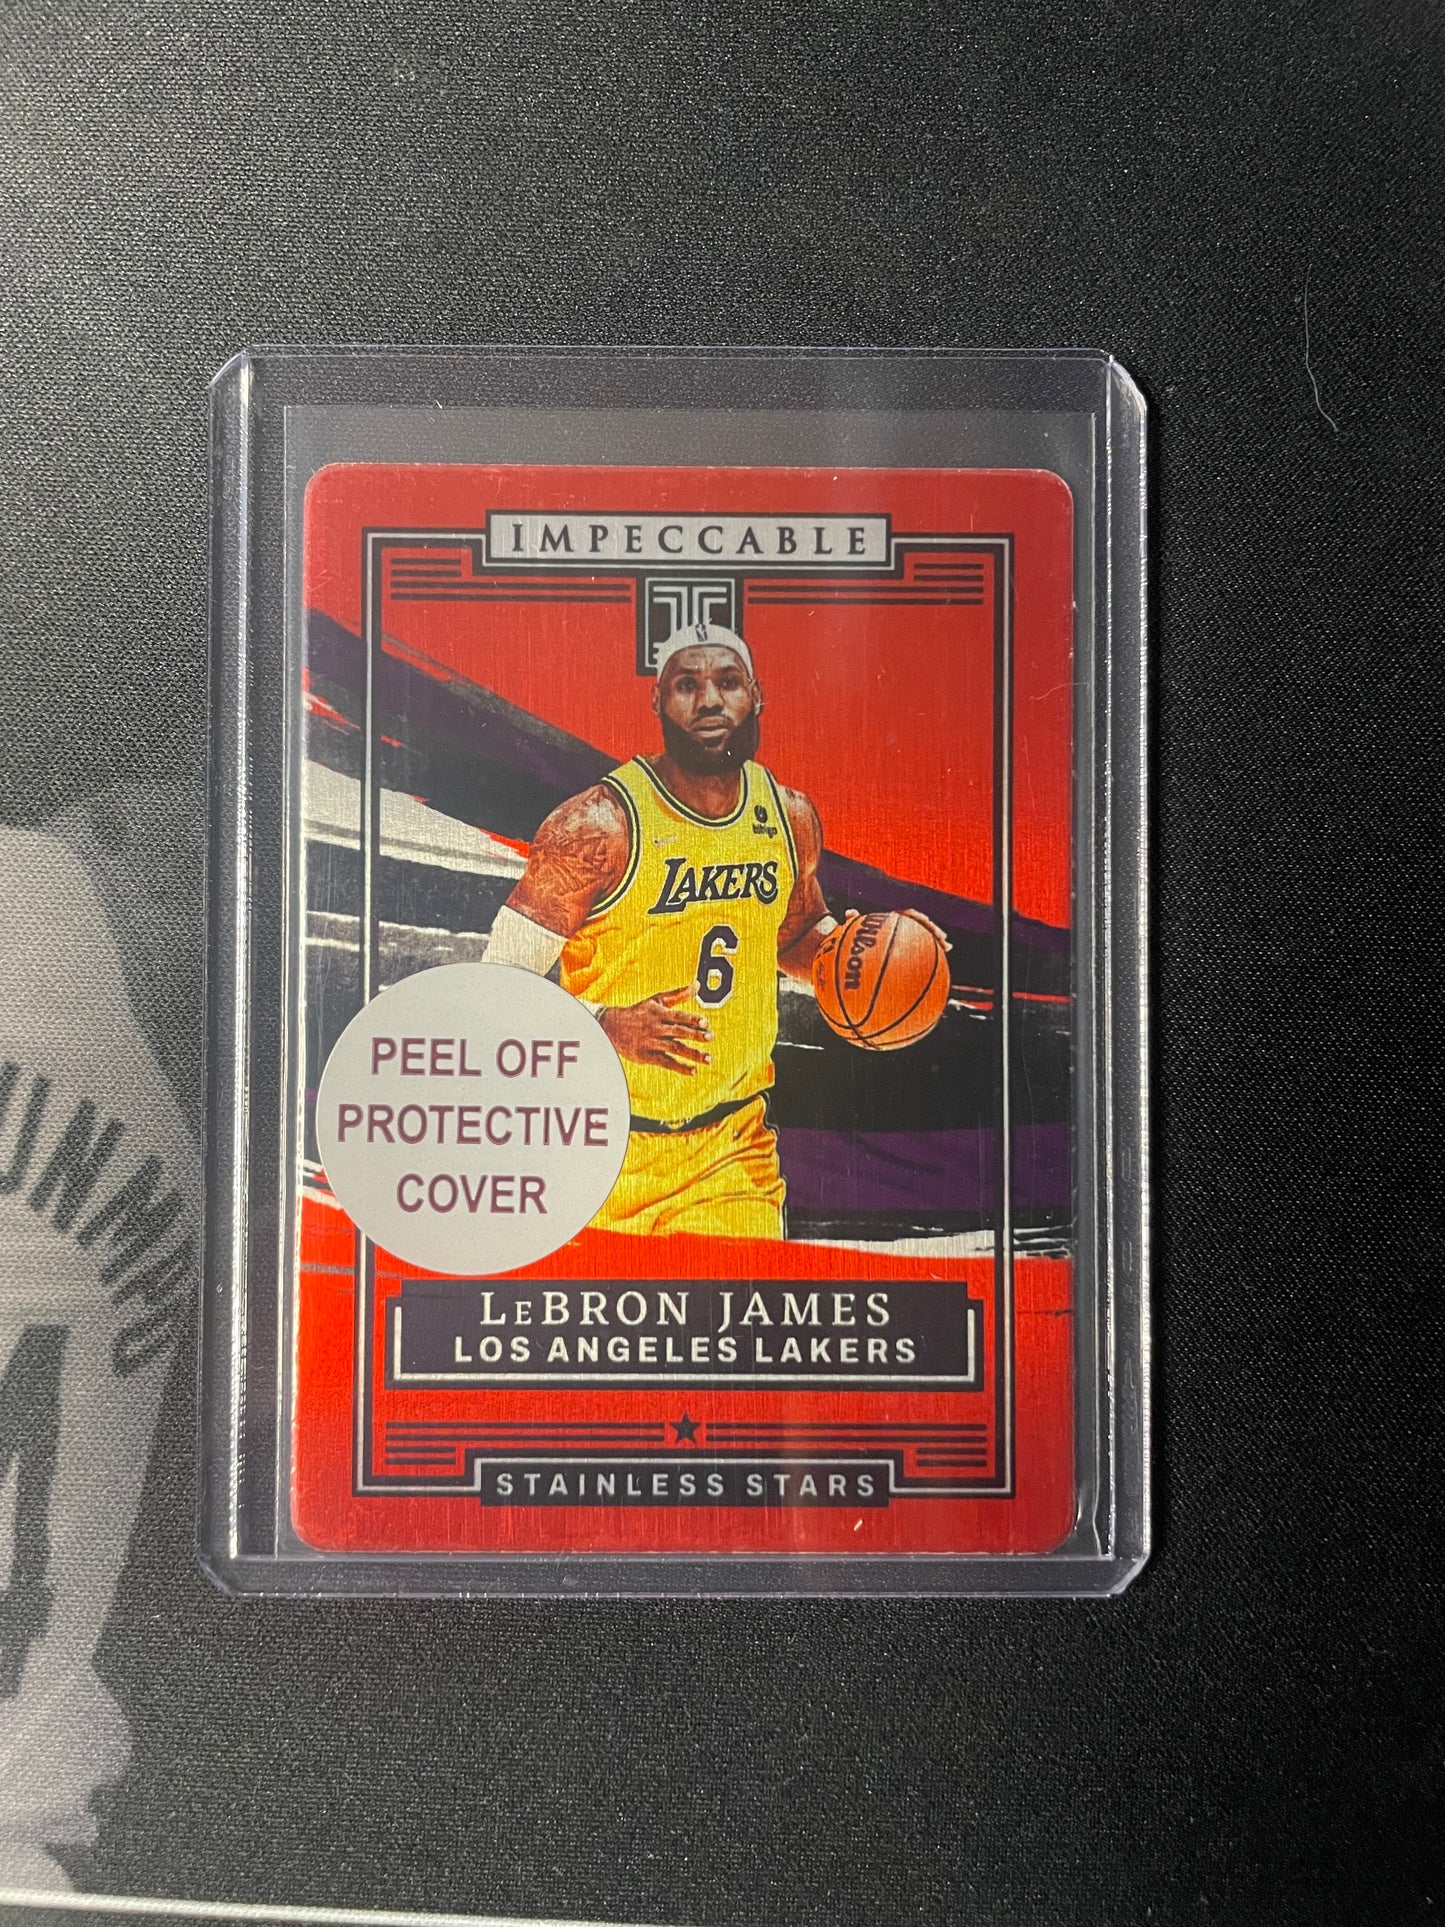 2021/22 Panini Impeccable #1 Lebron James  Los Angeles Lakers Stainless Stars